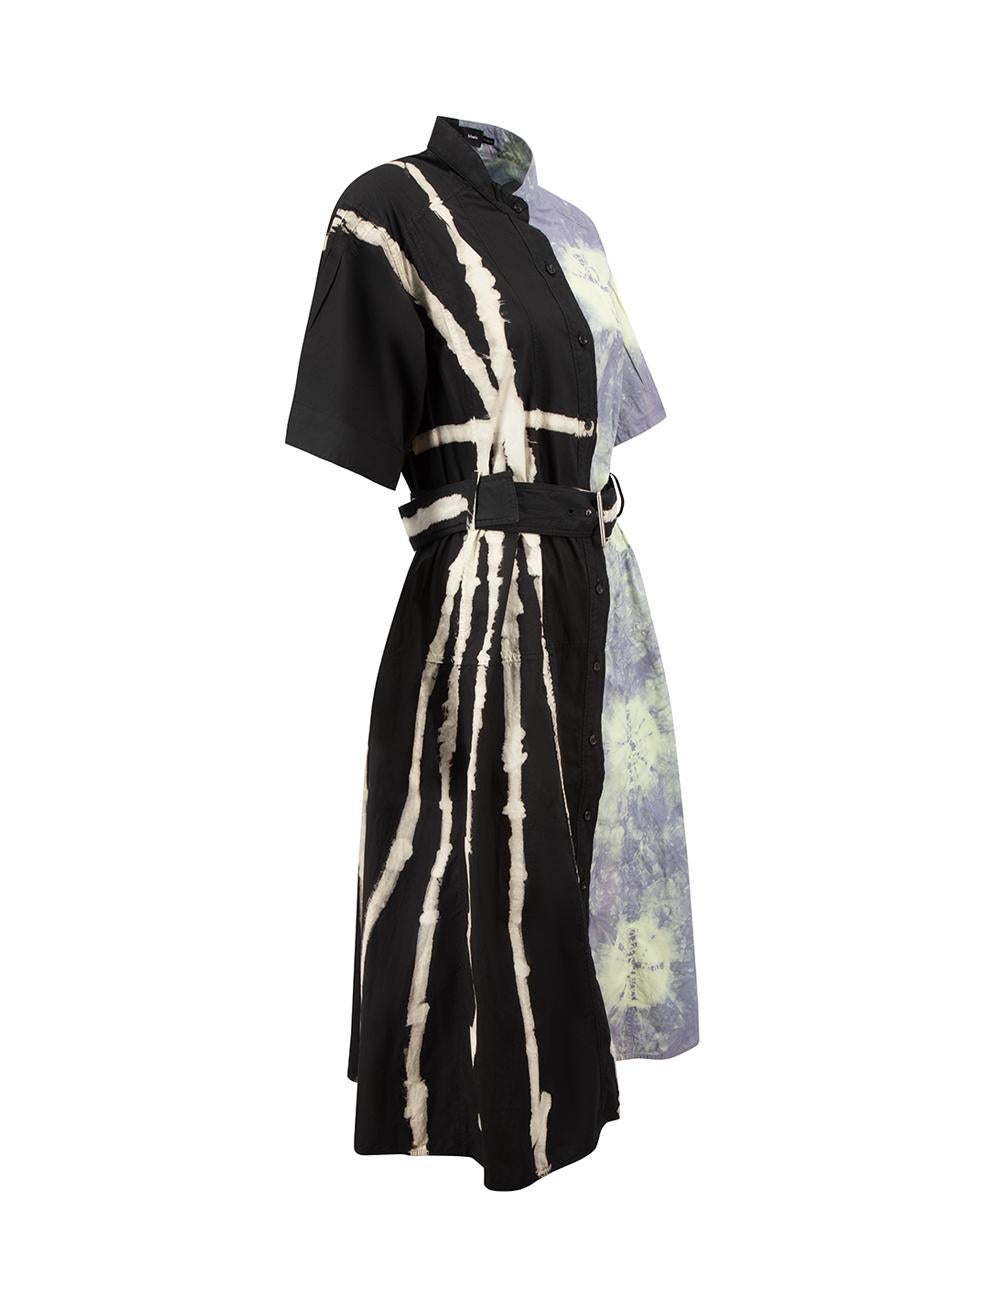 CONDITION is Very good. Minimal wear to dress is evident. Minimal wear to finishings on this used Proenza Schouler designer resale item.



Details


Multicolour

Cotton

Shirt dress

Contrast tie dye pattern

Midi length

V neckline

Front button